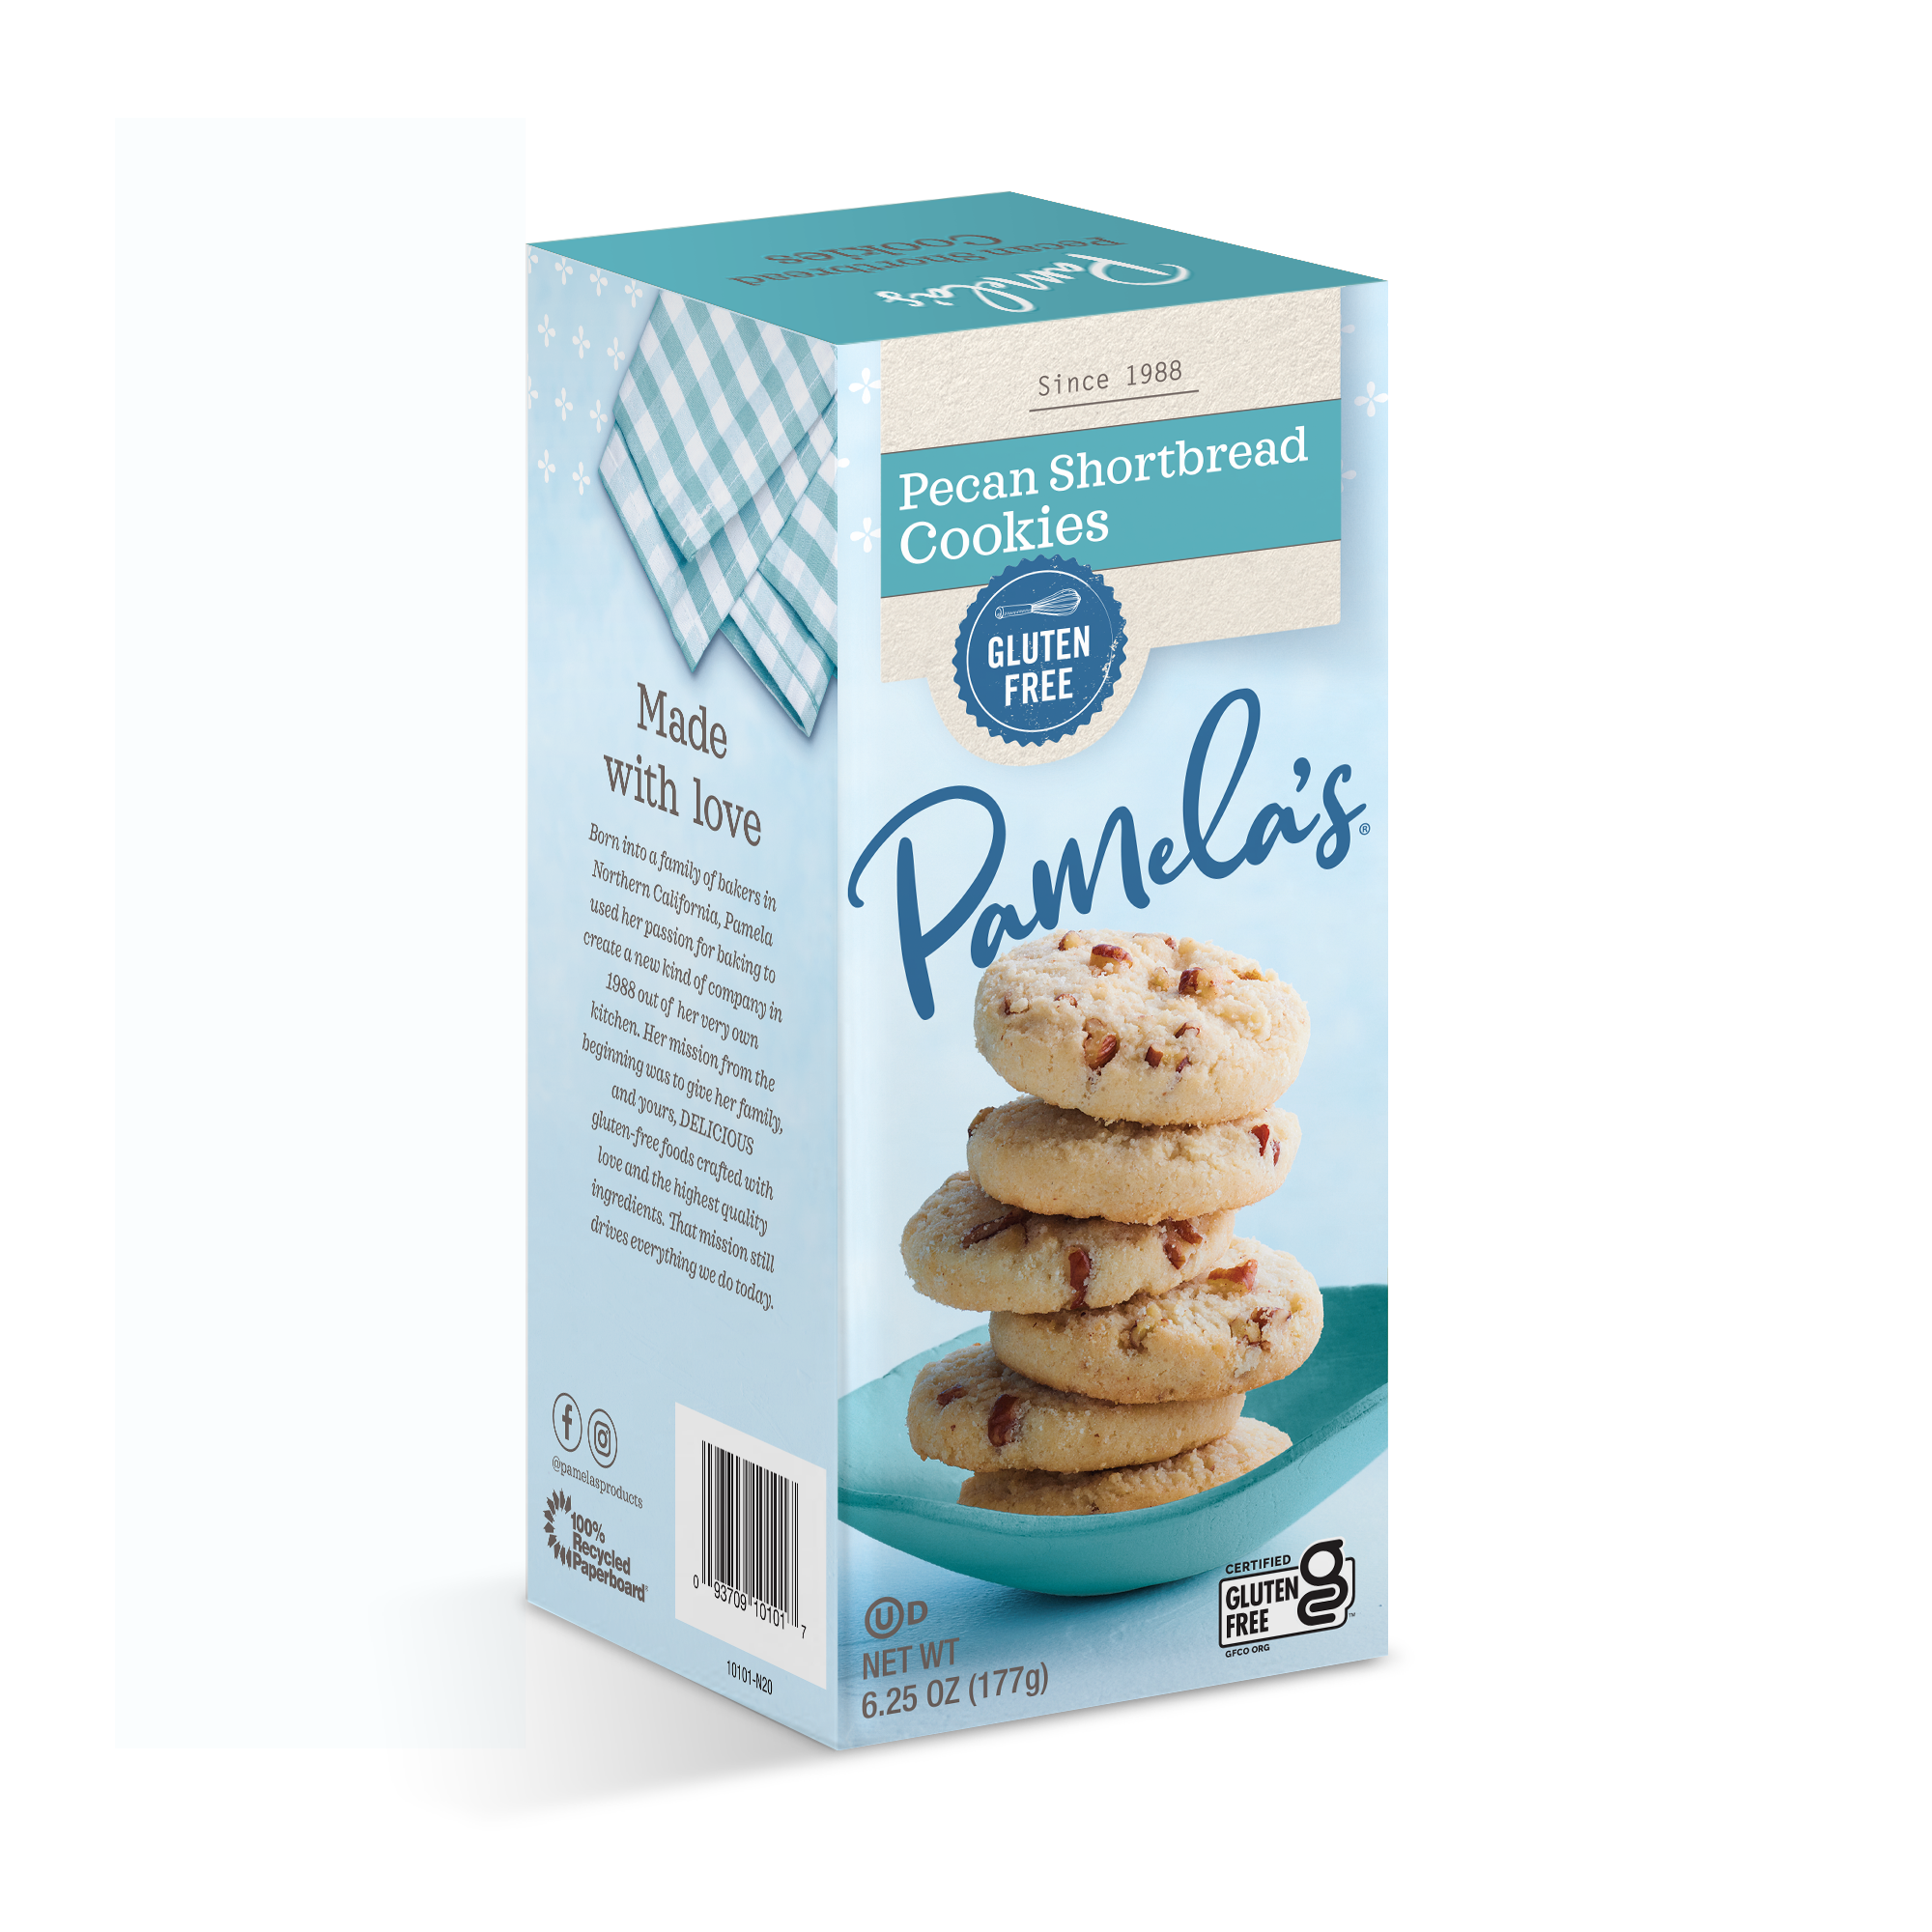 Allergy & Dietary Information – Pamela's Products